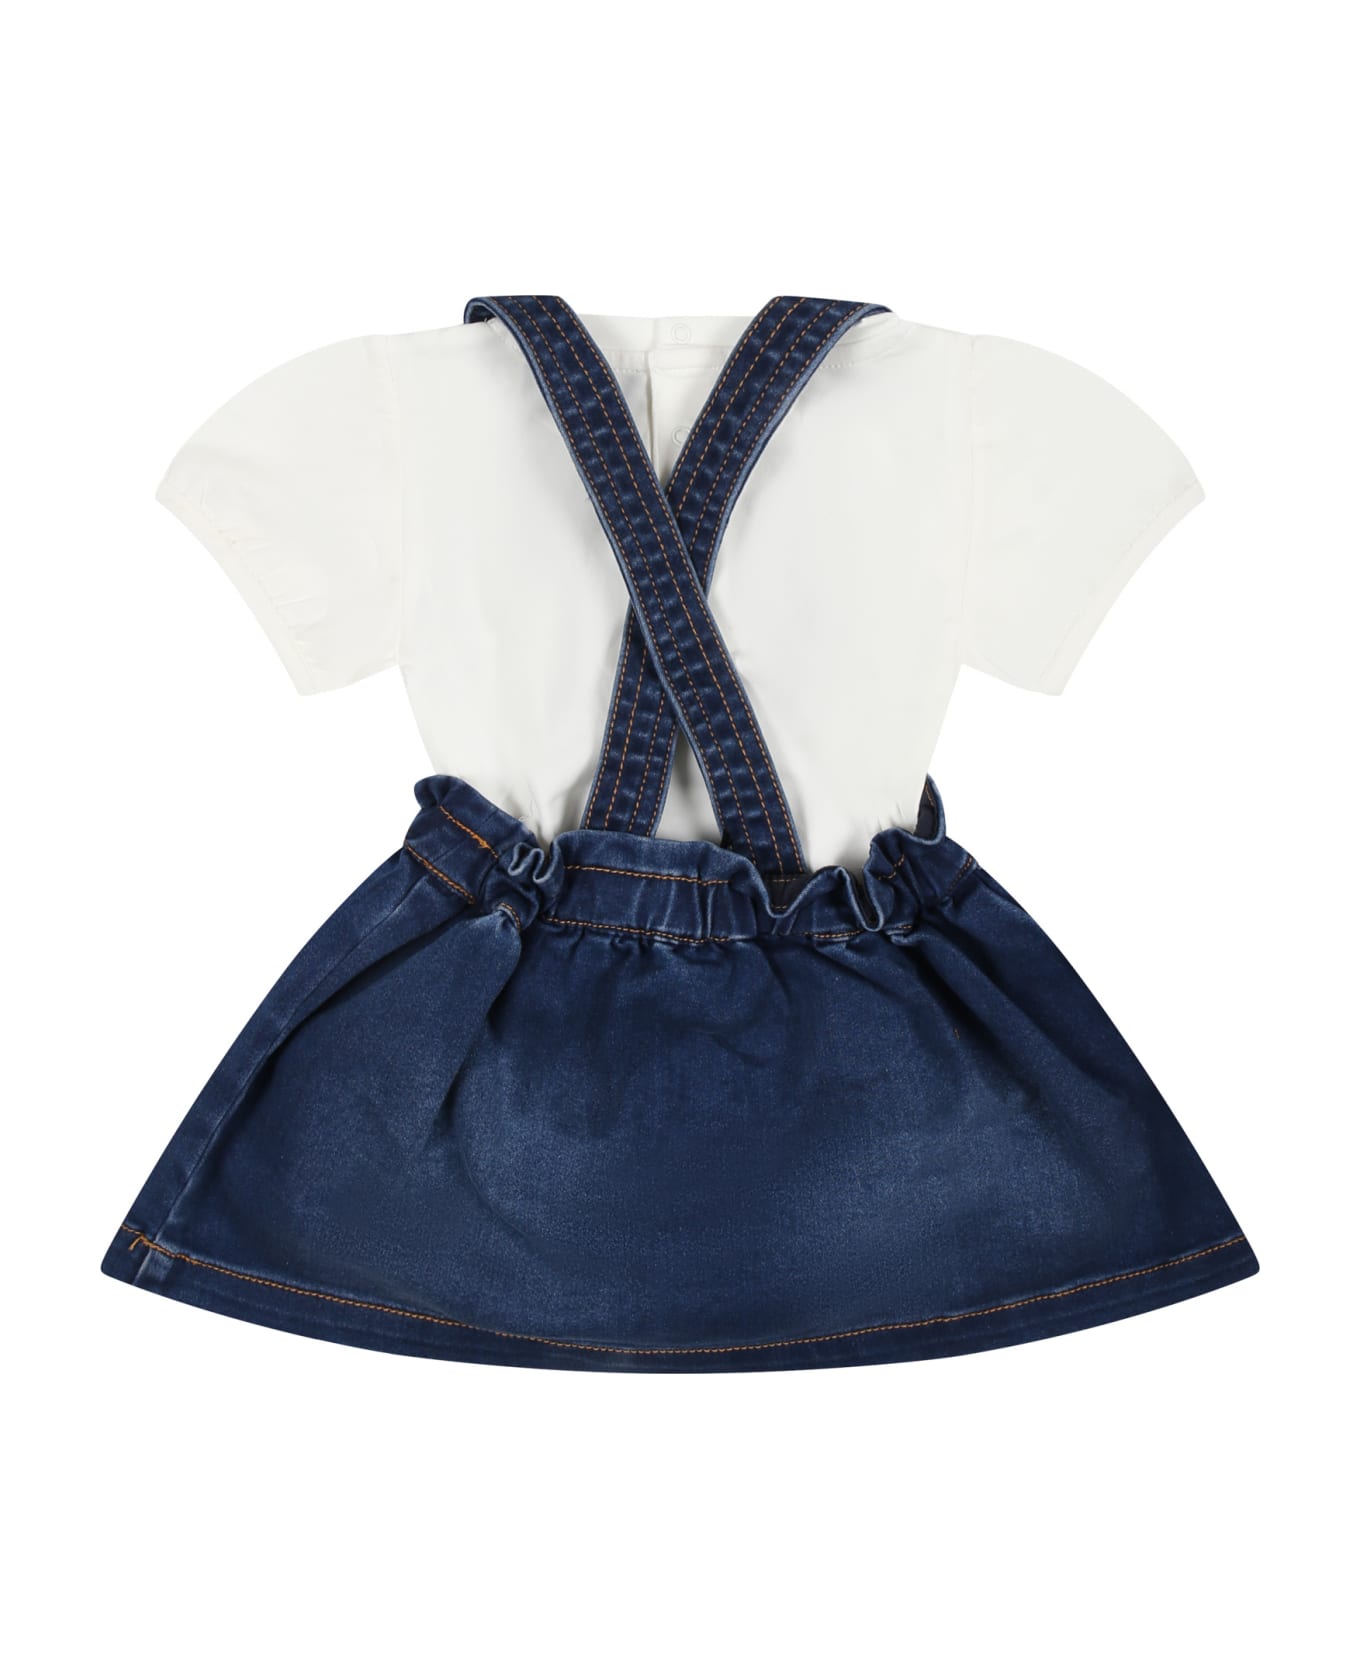 Moschino Denim Dungarees For Baby Girl With Teddy Bear - Denim